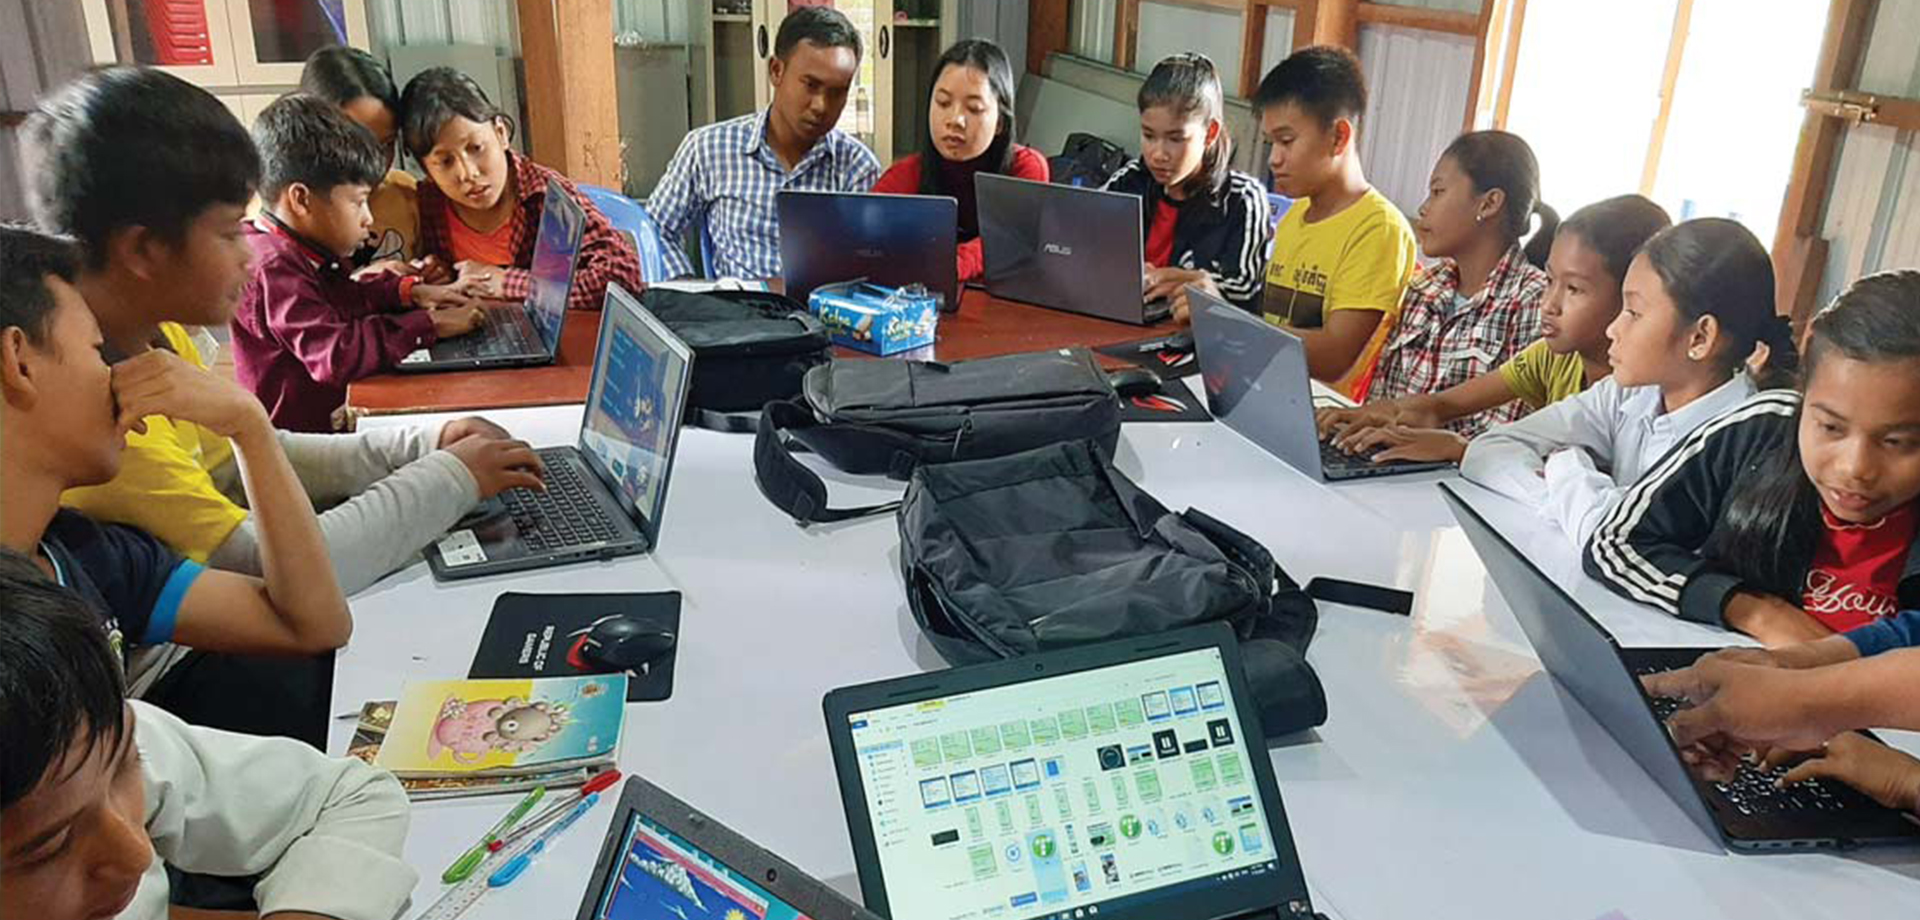 (English) Children at Floating Area Gained Access To Computer and English Class